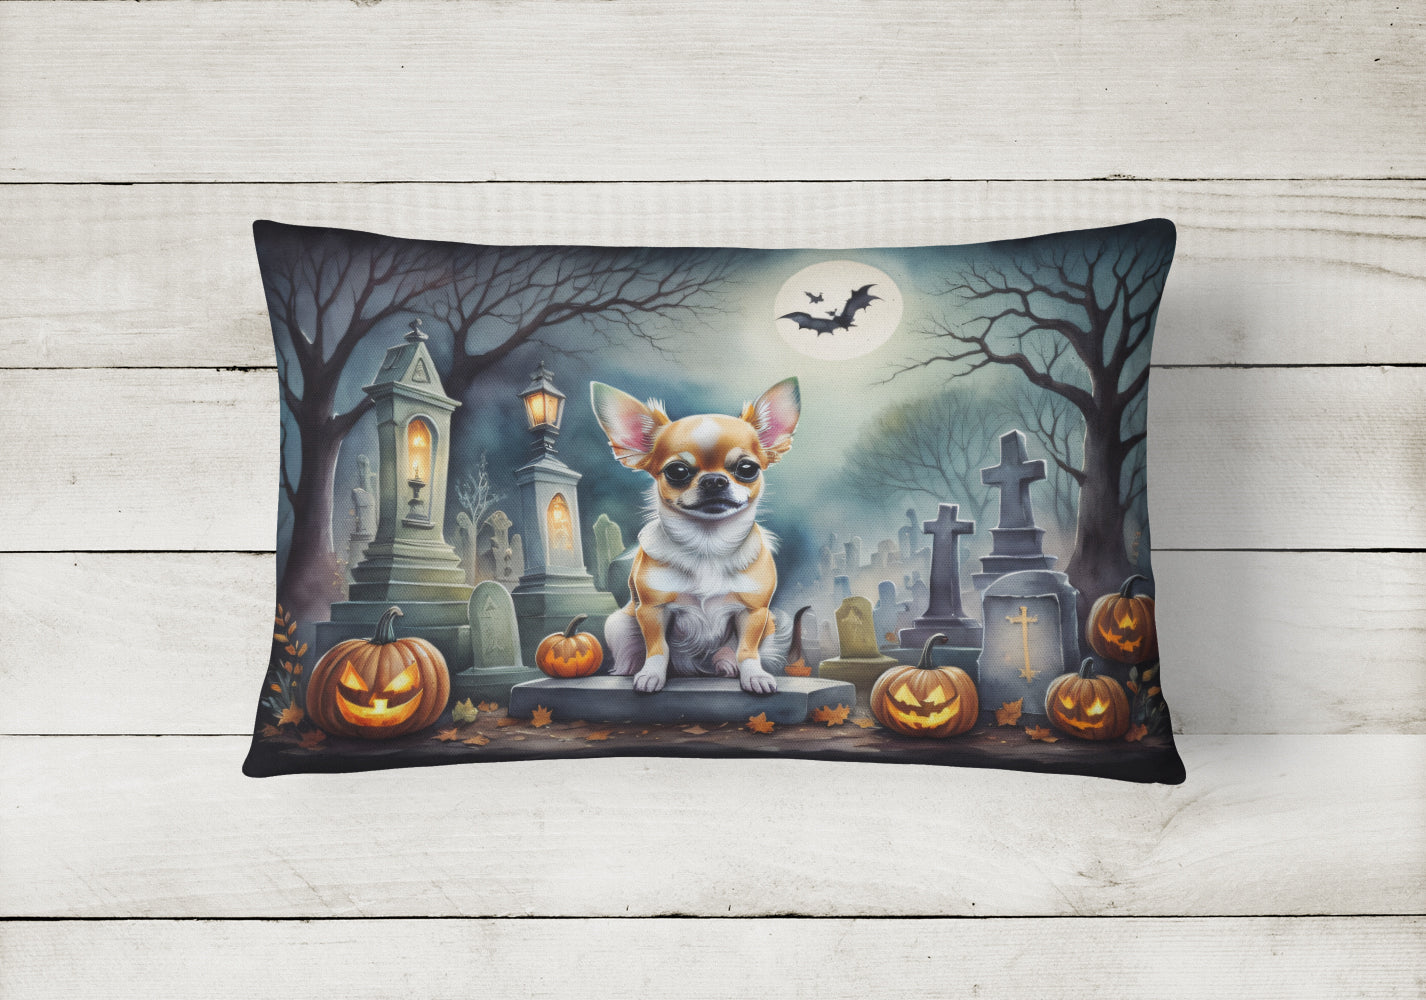 Buy this Chihuahua Spooky Halloween Fabric Decorative Pillow